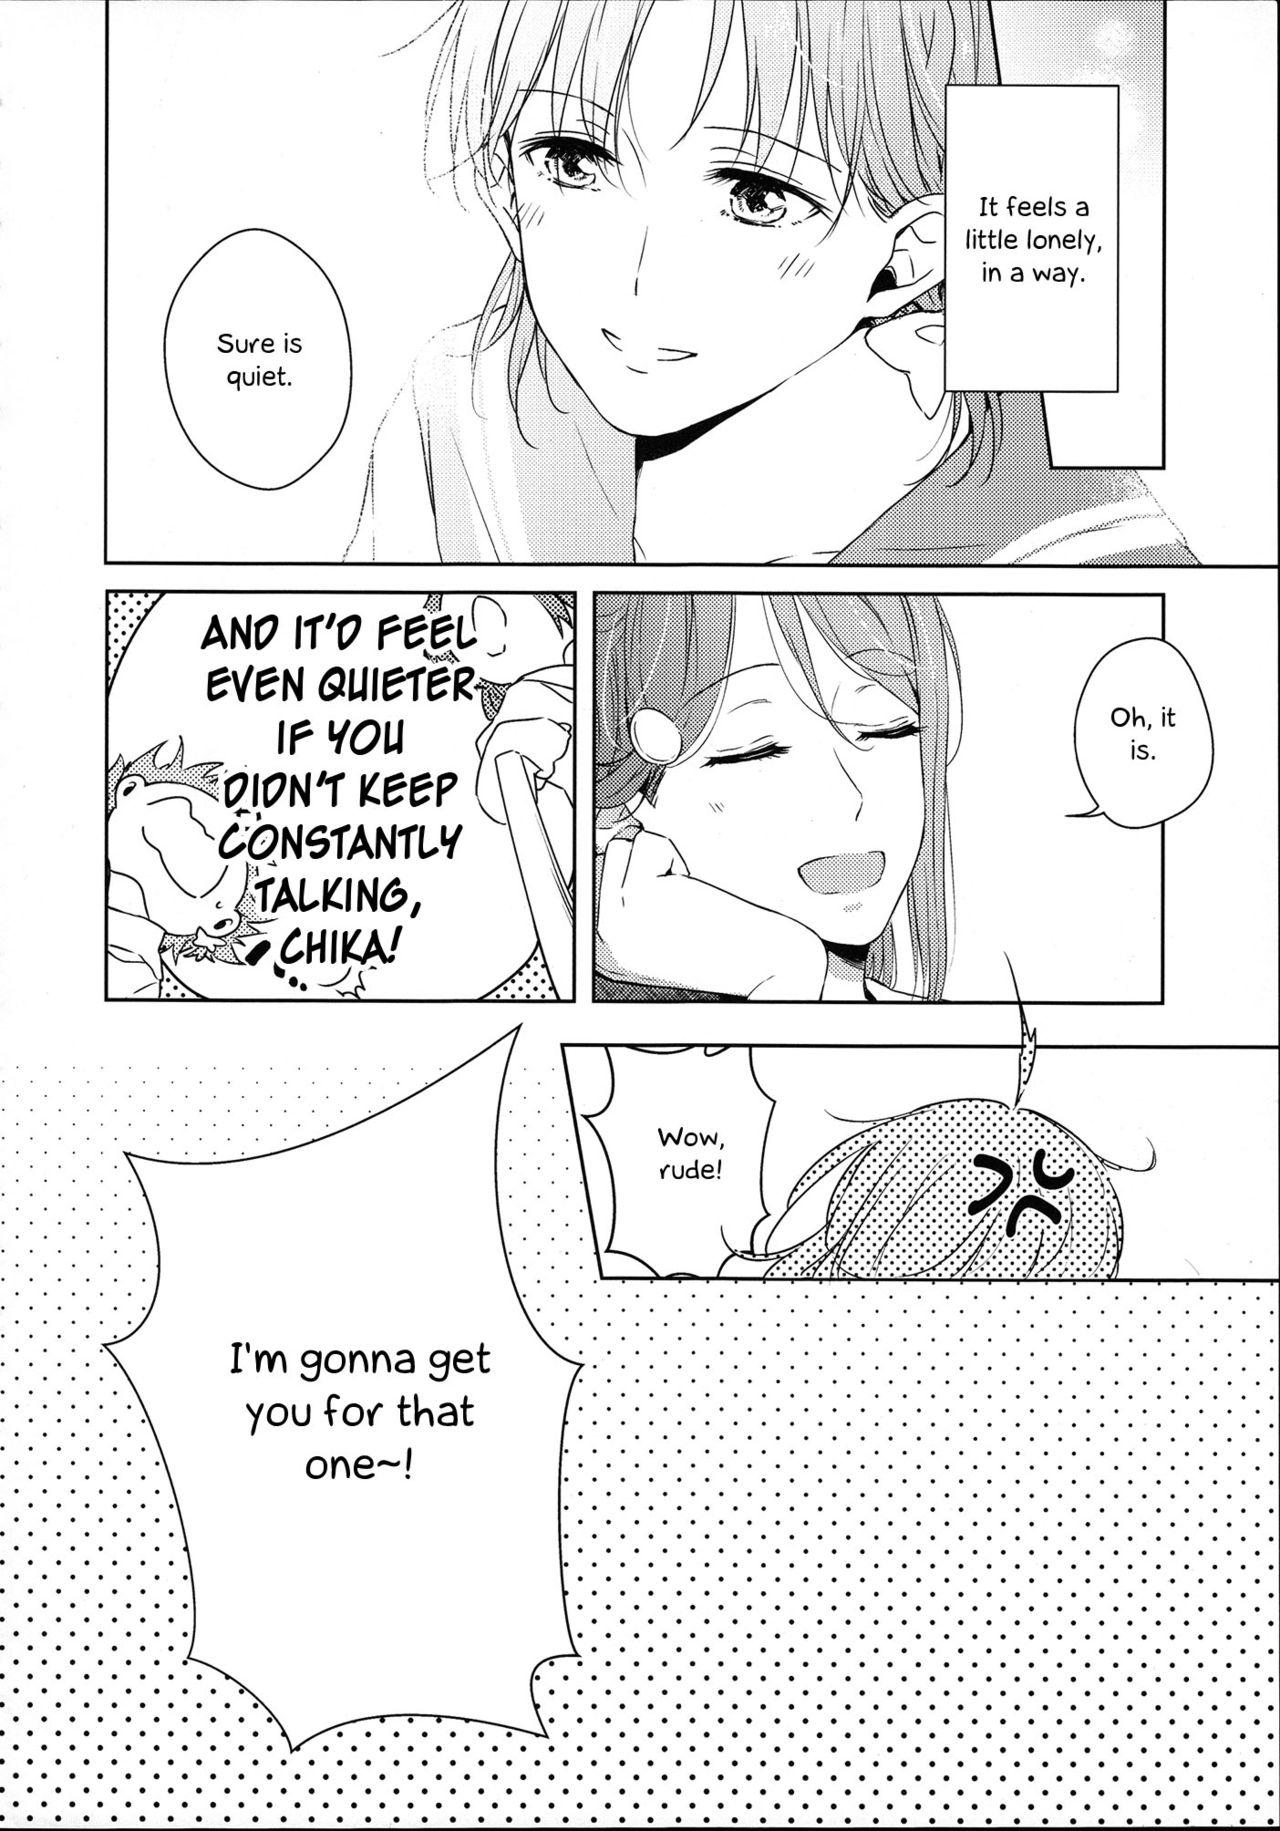 First Time Total Riko Addiction - Love live sunshine Girl - Page 12